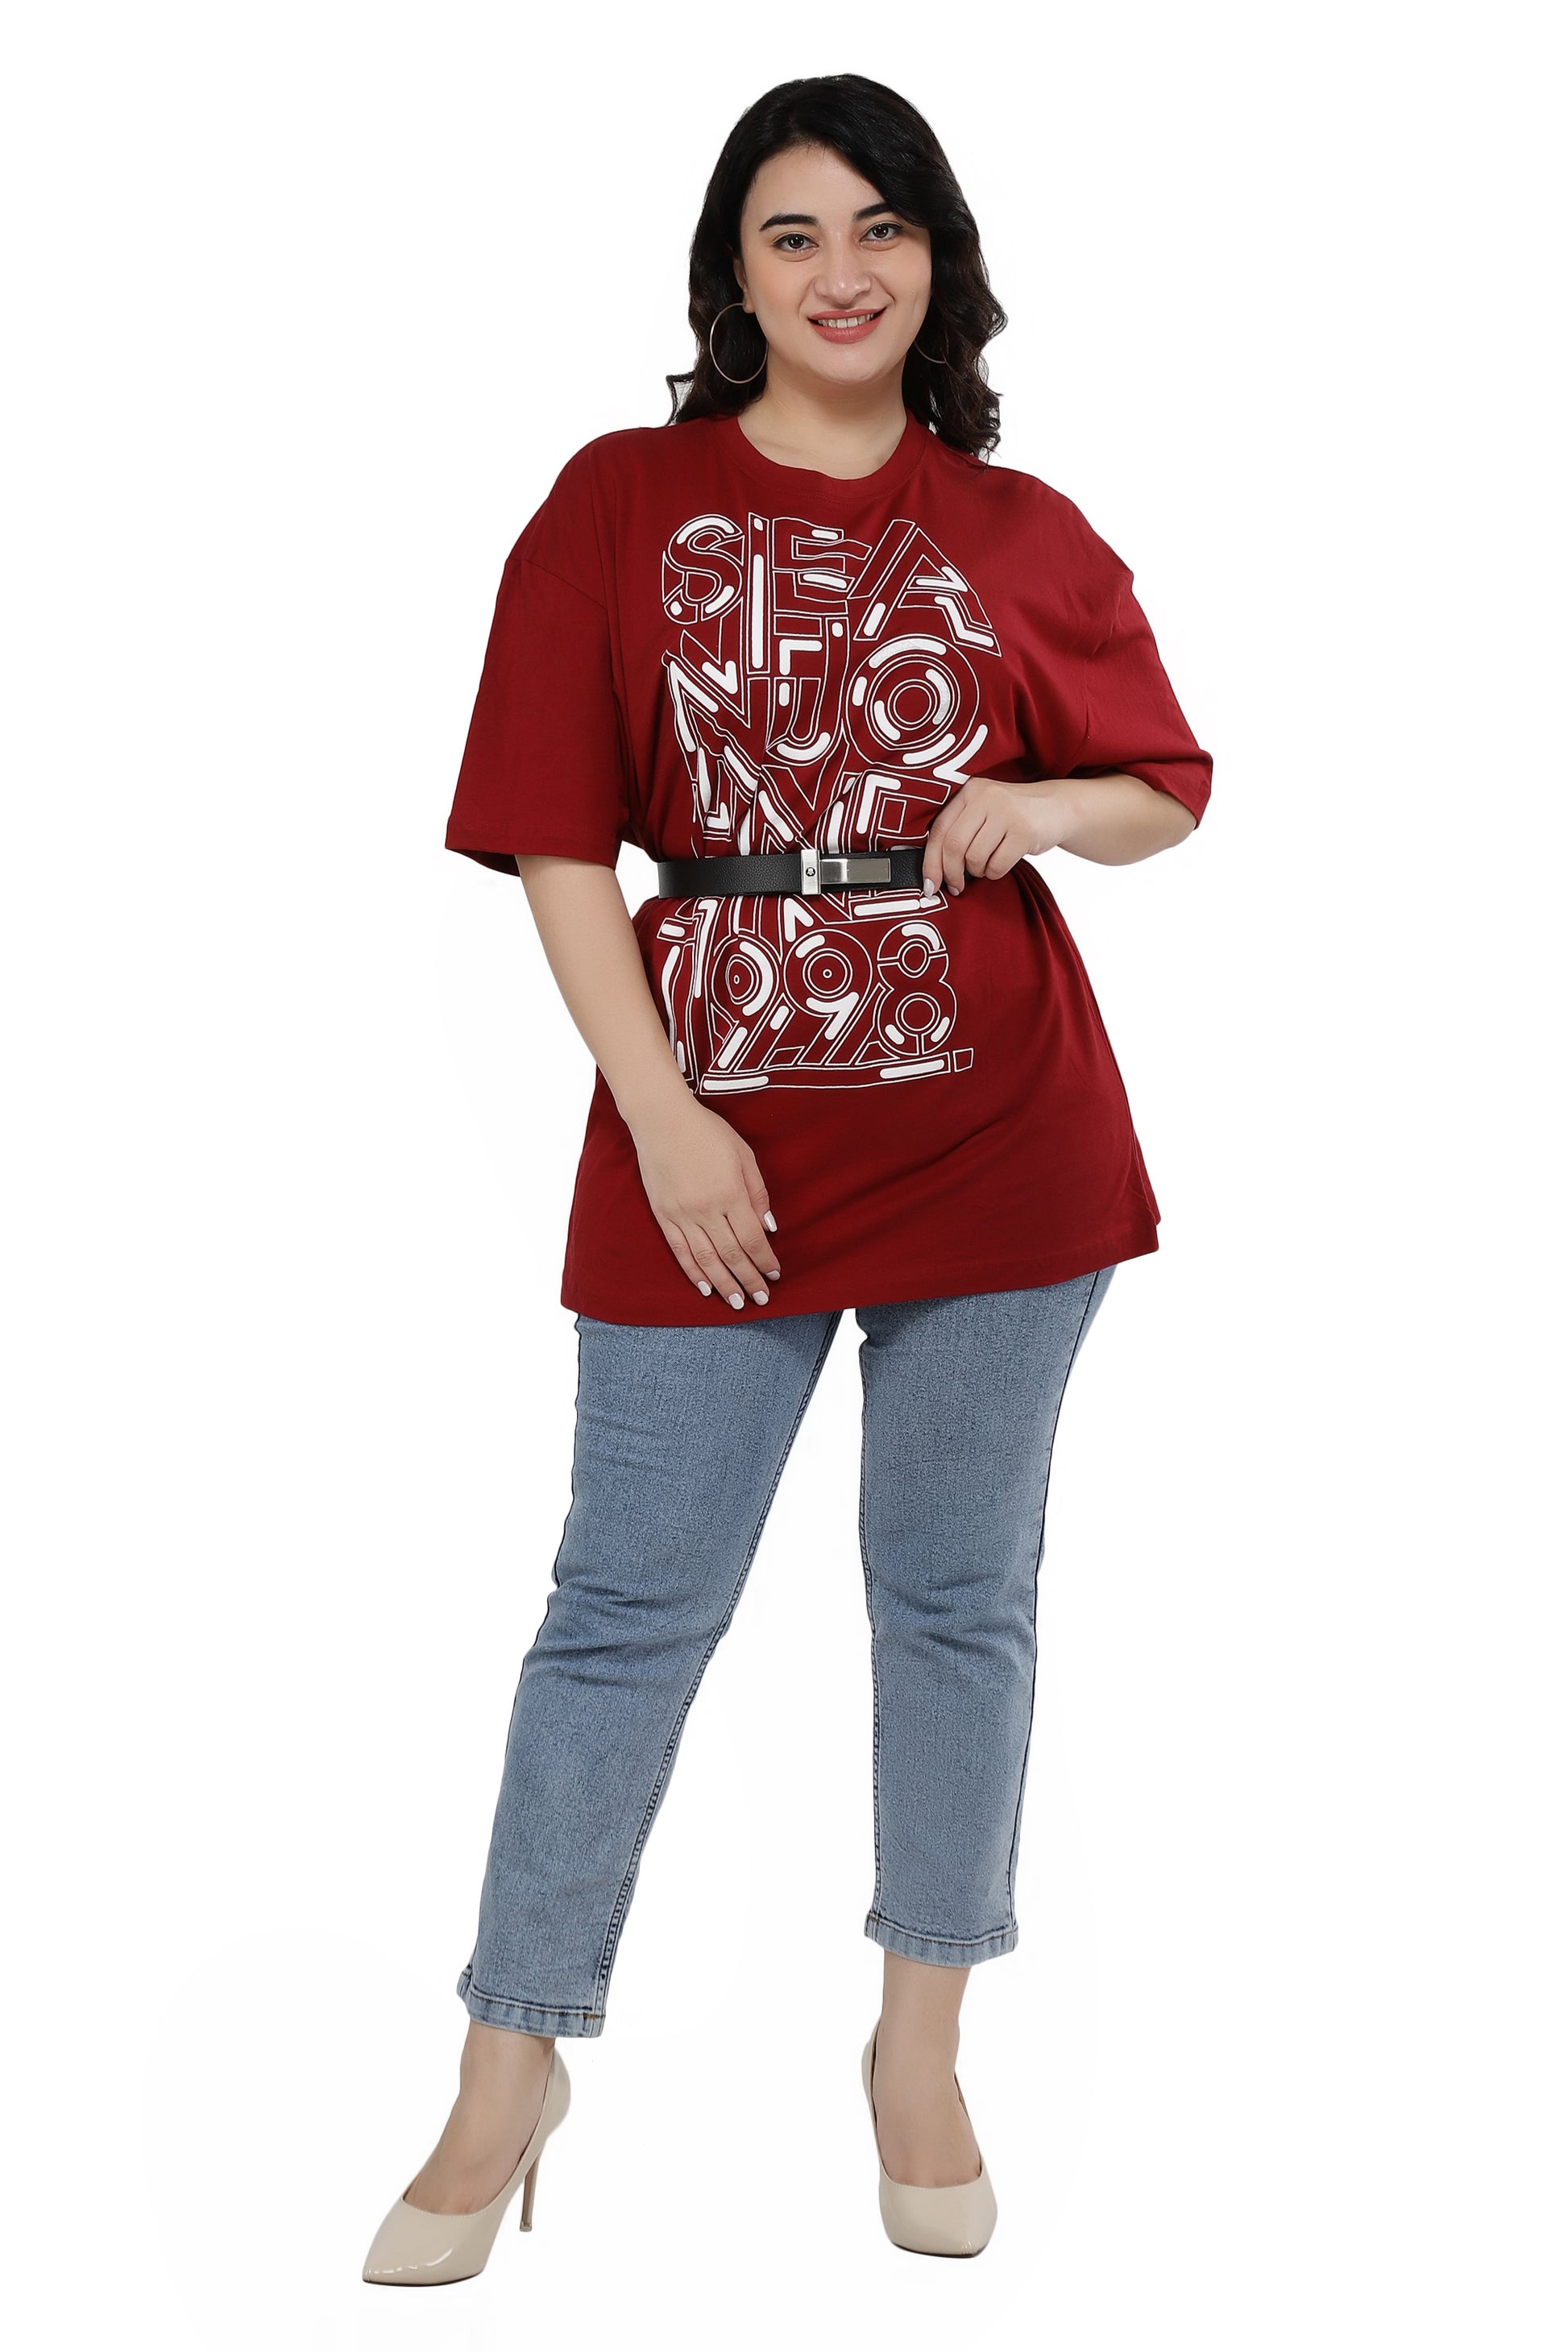  Womens Graphic Tees By Black Lantern – Screen Printed Cotton  Poly Blend Short Sleeve Shirt in Heather Maroon, River Mountain Forest  Design (Sizes XS-XL) : Handmade Products